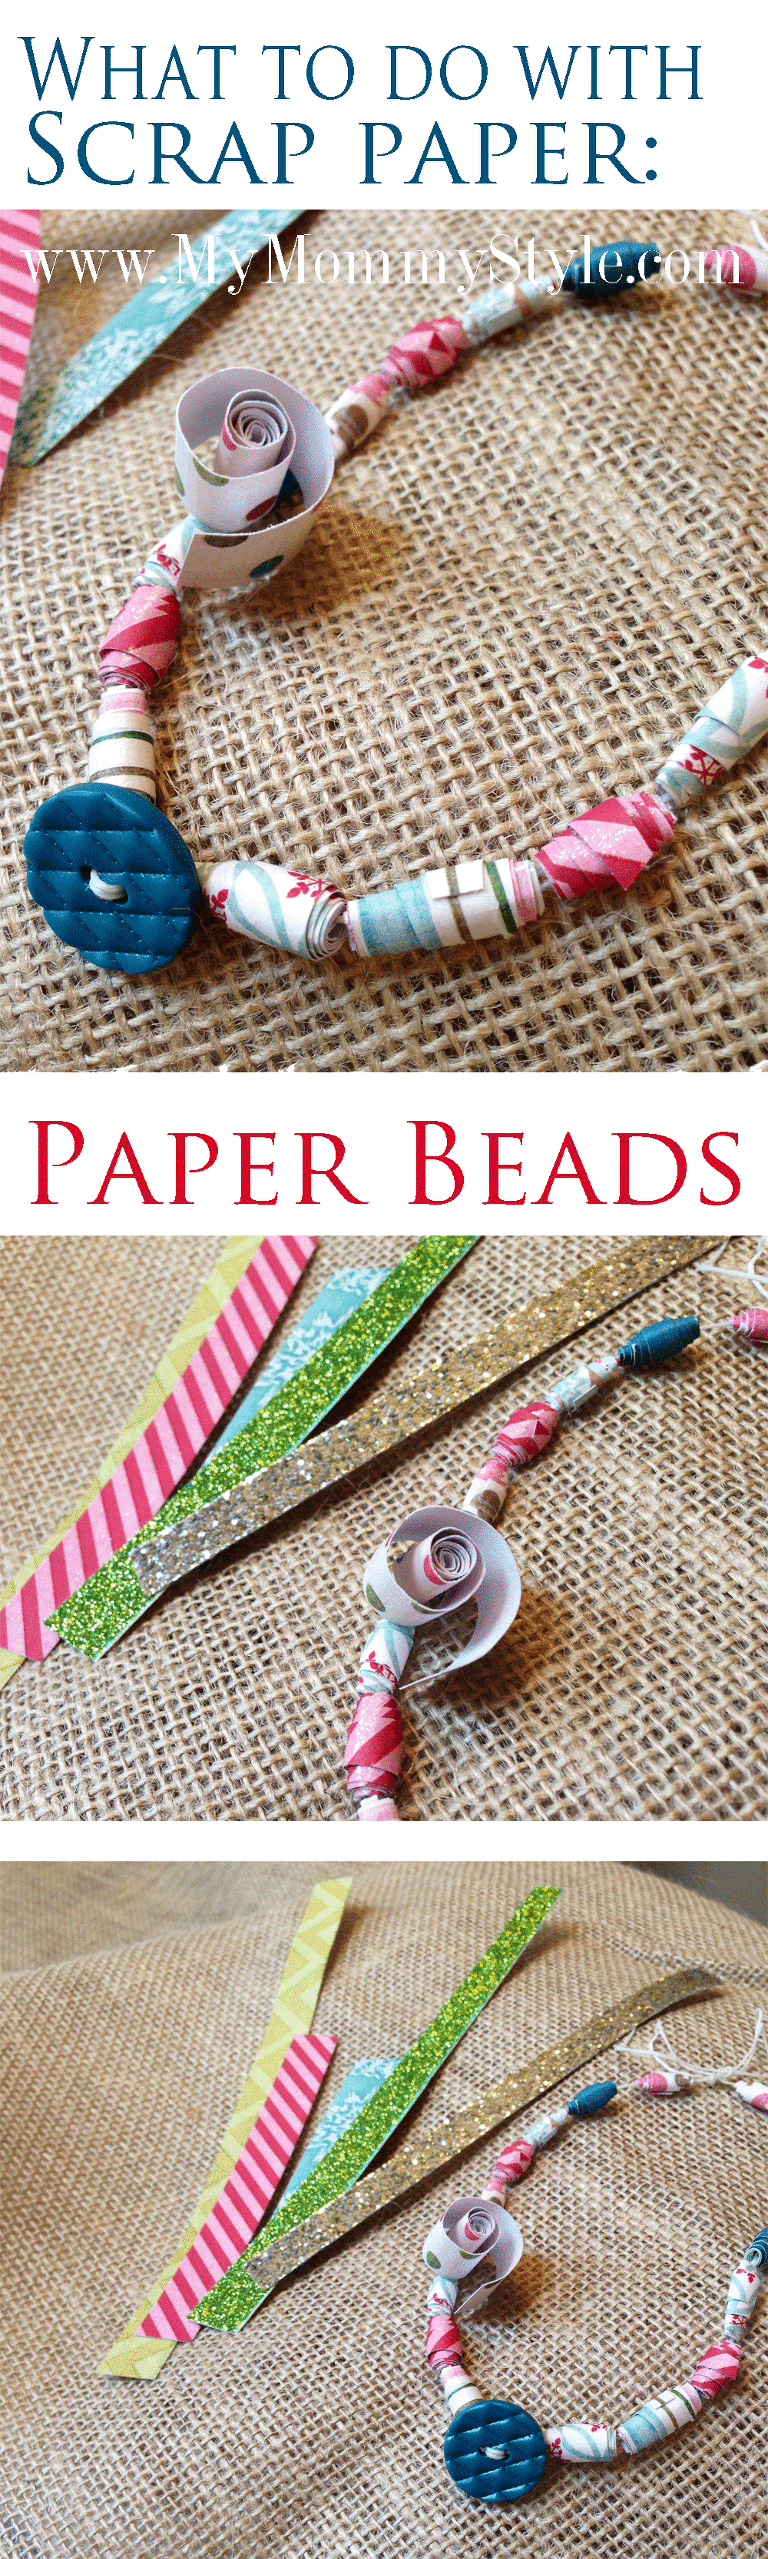 paper-beads-scrap-paper-christmas-necklace-craft-ideas